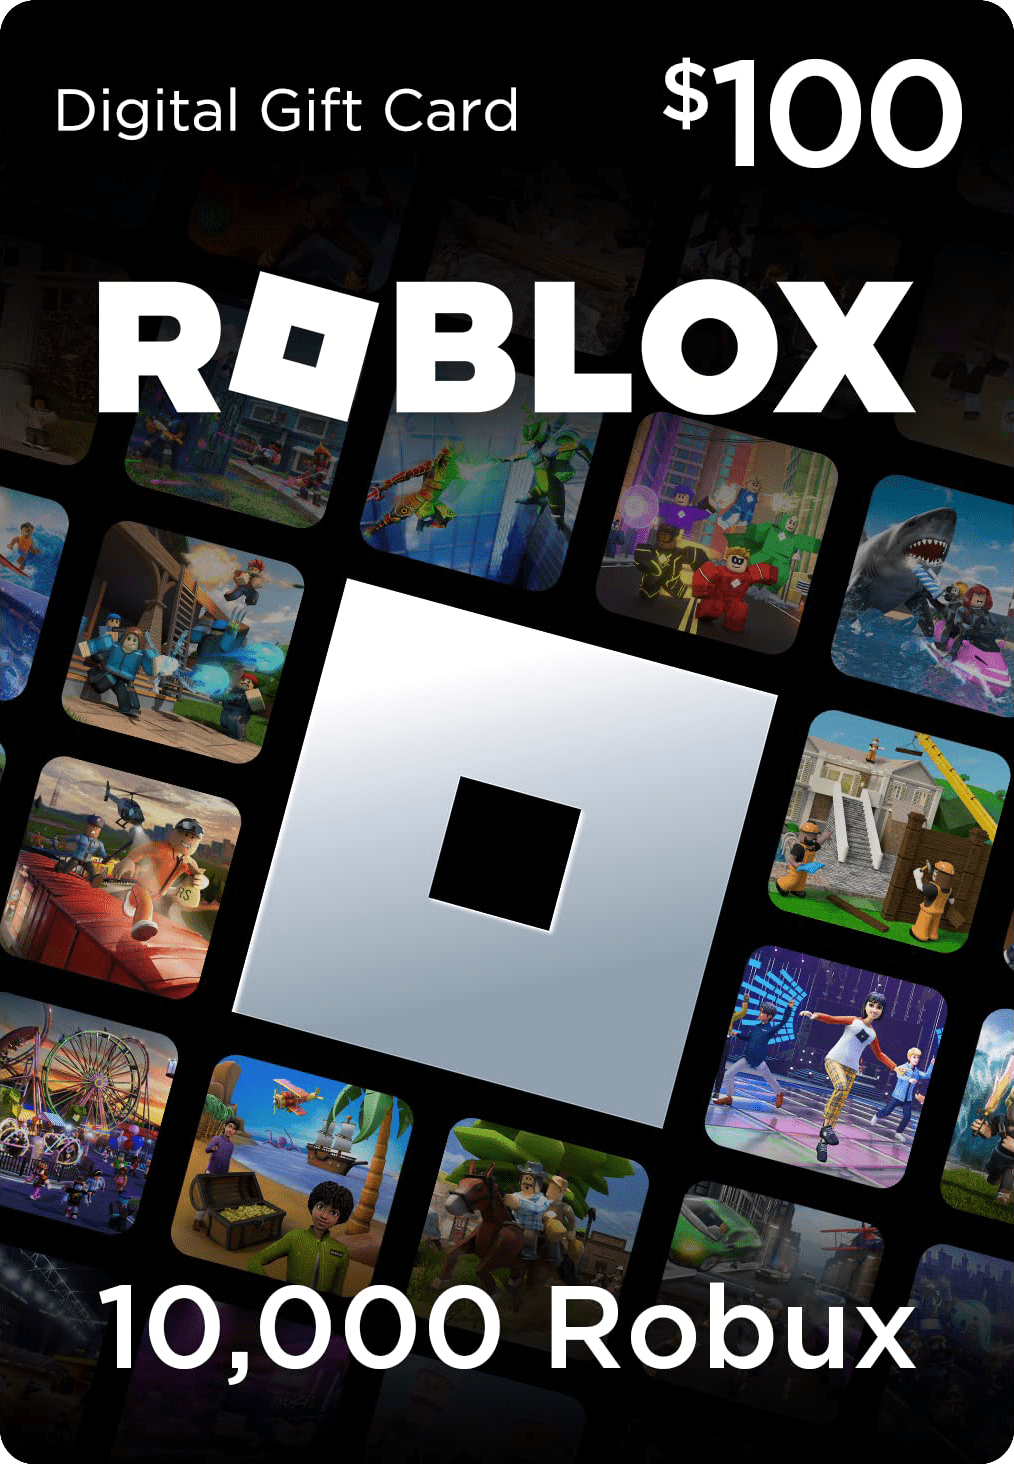 Buy Roblox Gift Card 10000 Robux (PC) - Roblox Key - UNITED STATES